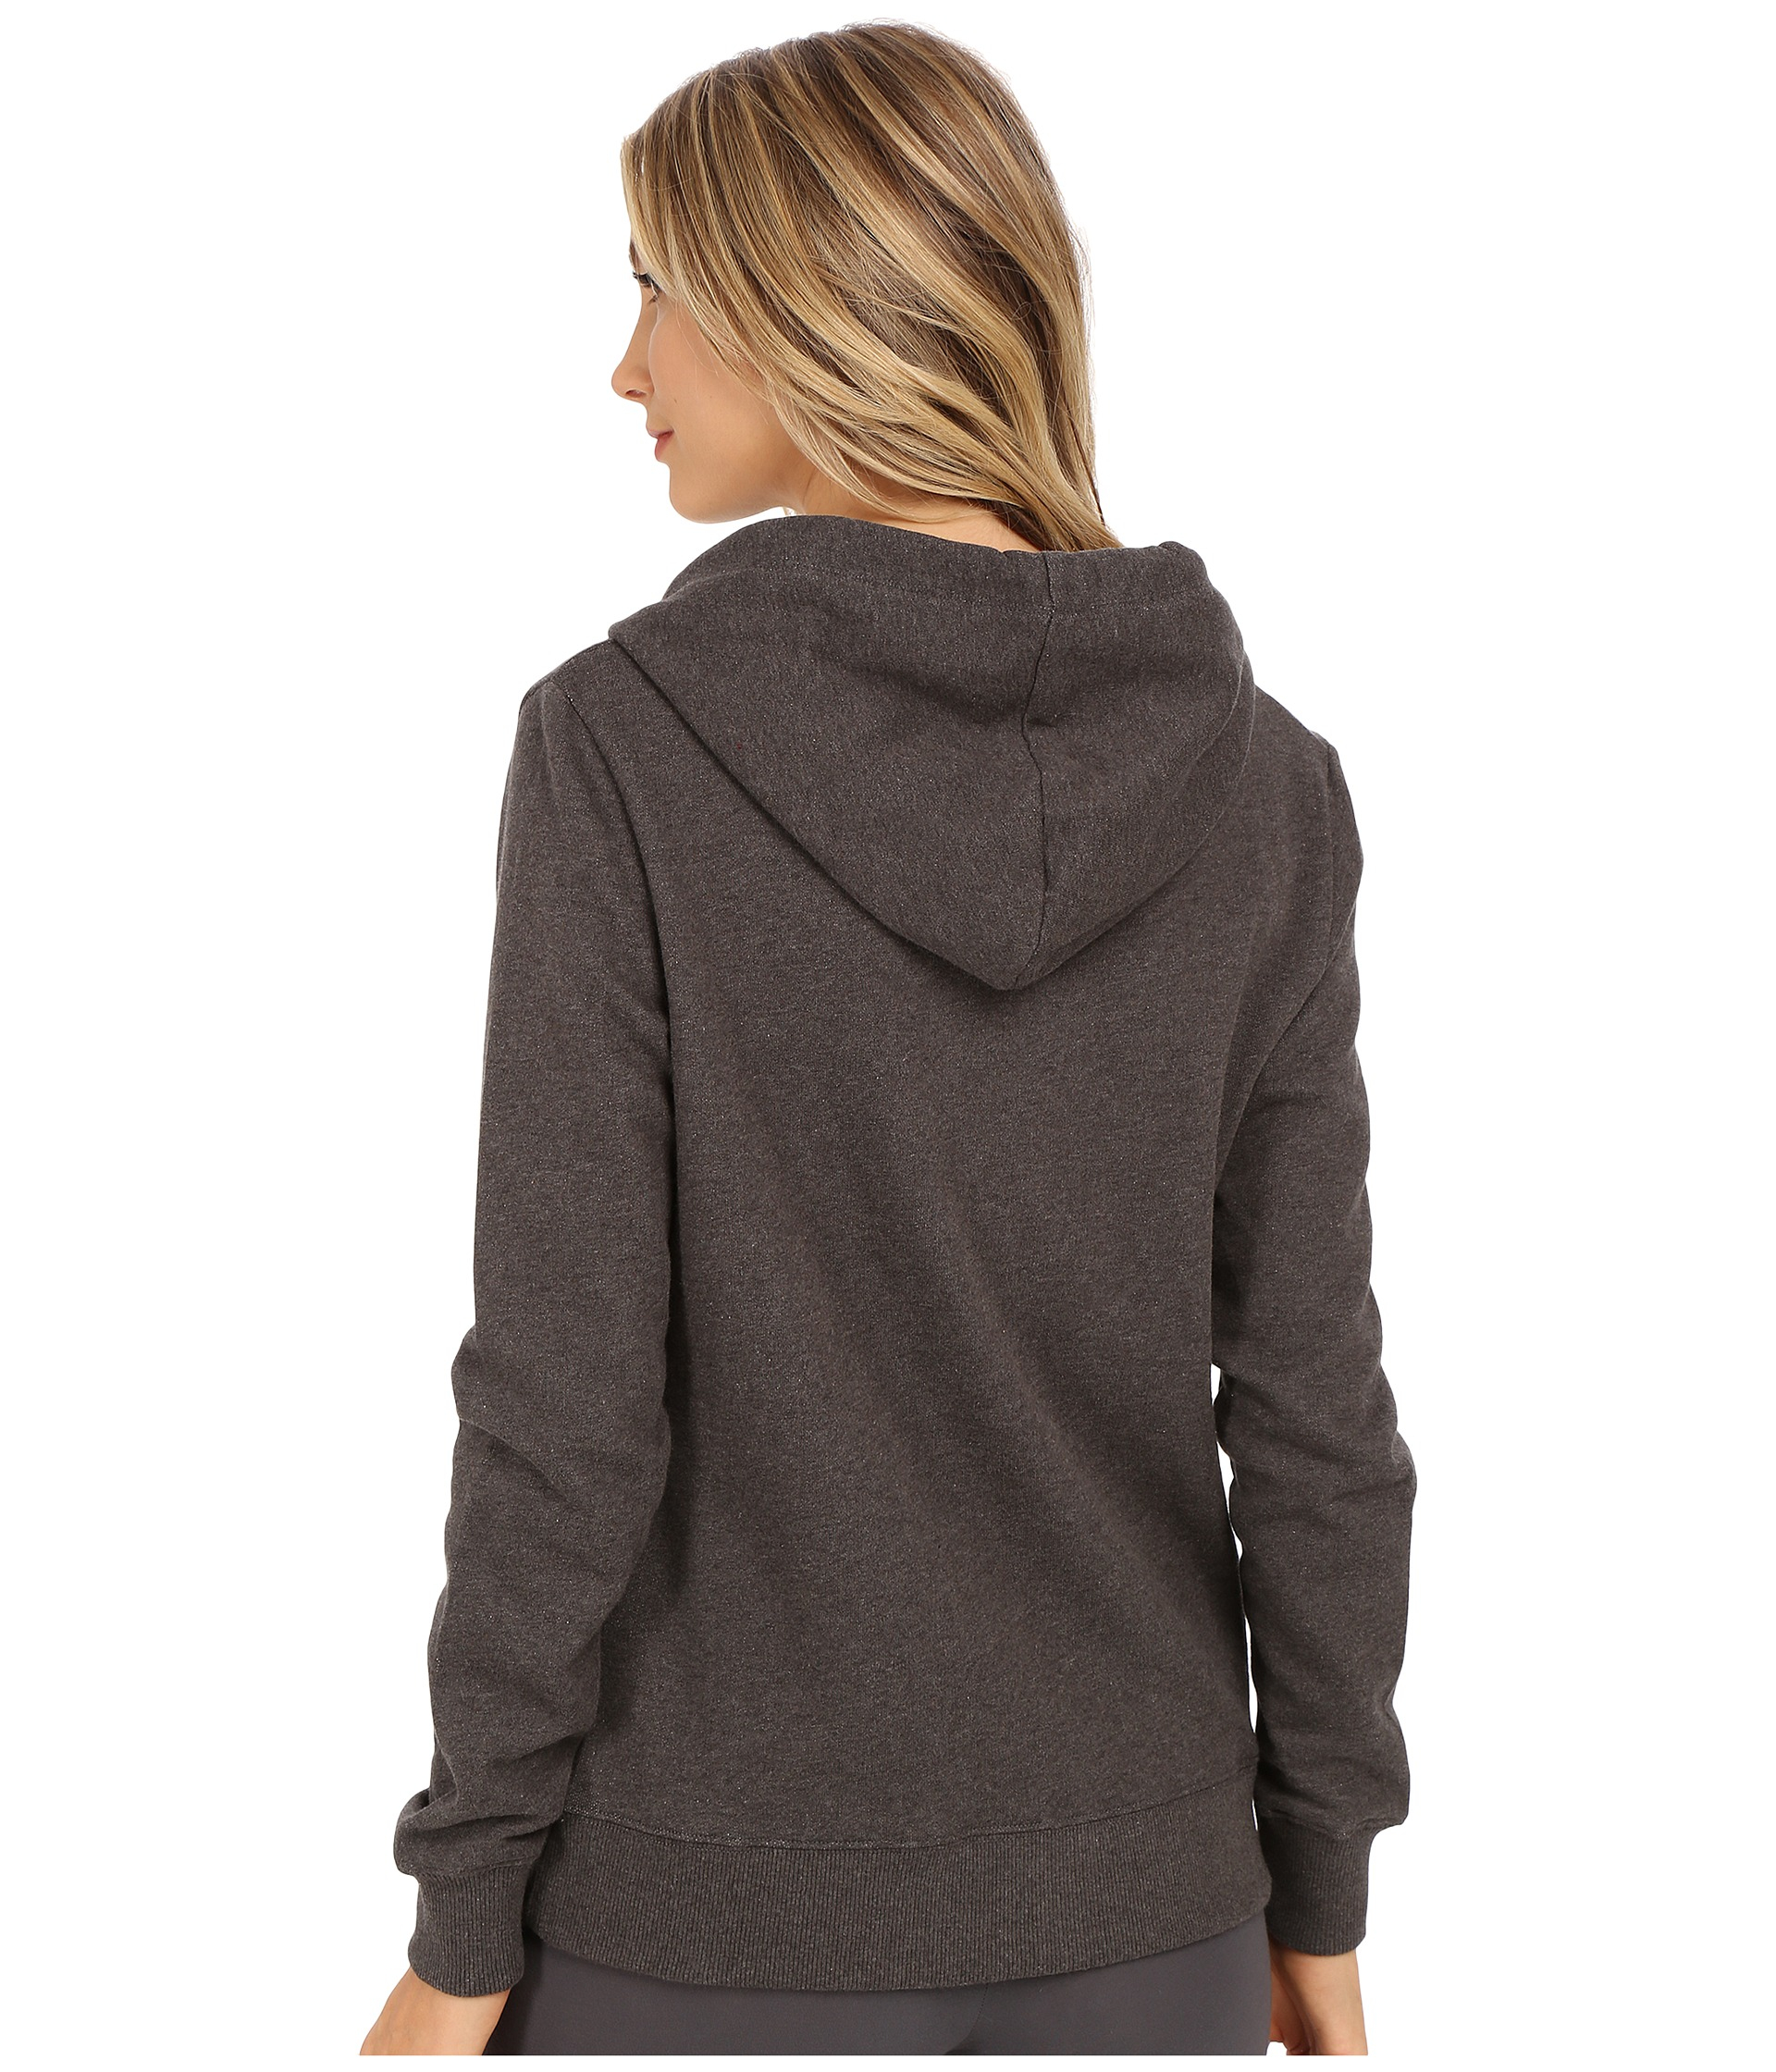 Lyst - Pact Women's Organic Cotton Hoodie in Gray